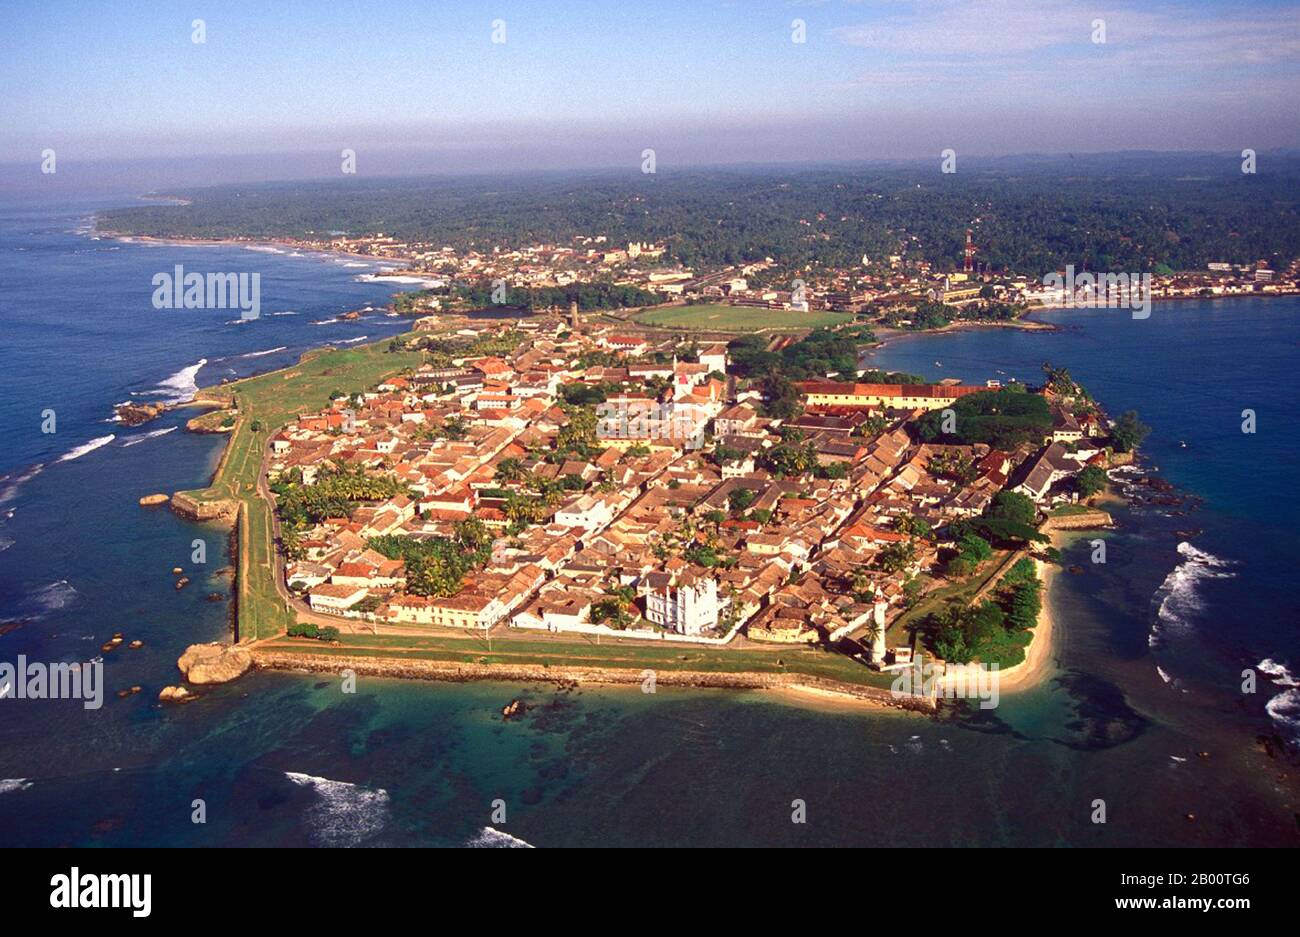 Sri Lanka: Galle Fort and peninsula from the air. This image has been released into the public domain.  Sri Lanka had always been an important port and trading post in the ancient world, and was increasingly frequented by merchant ships from the Middle East, Persia, Burma, Thailand, Malaysia, Indonesia and other parts of Southeast Asia. The islands were known to the first European explorers of South Asia and settled by many groups of Arab and Malay merchants. Stock Photo